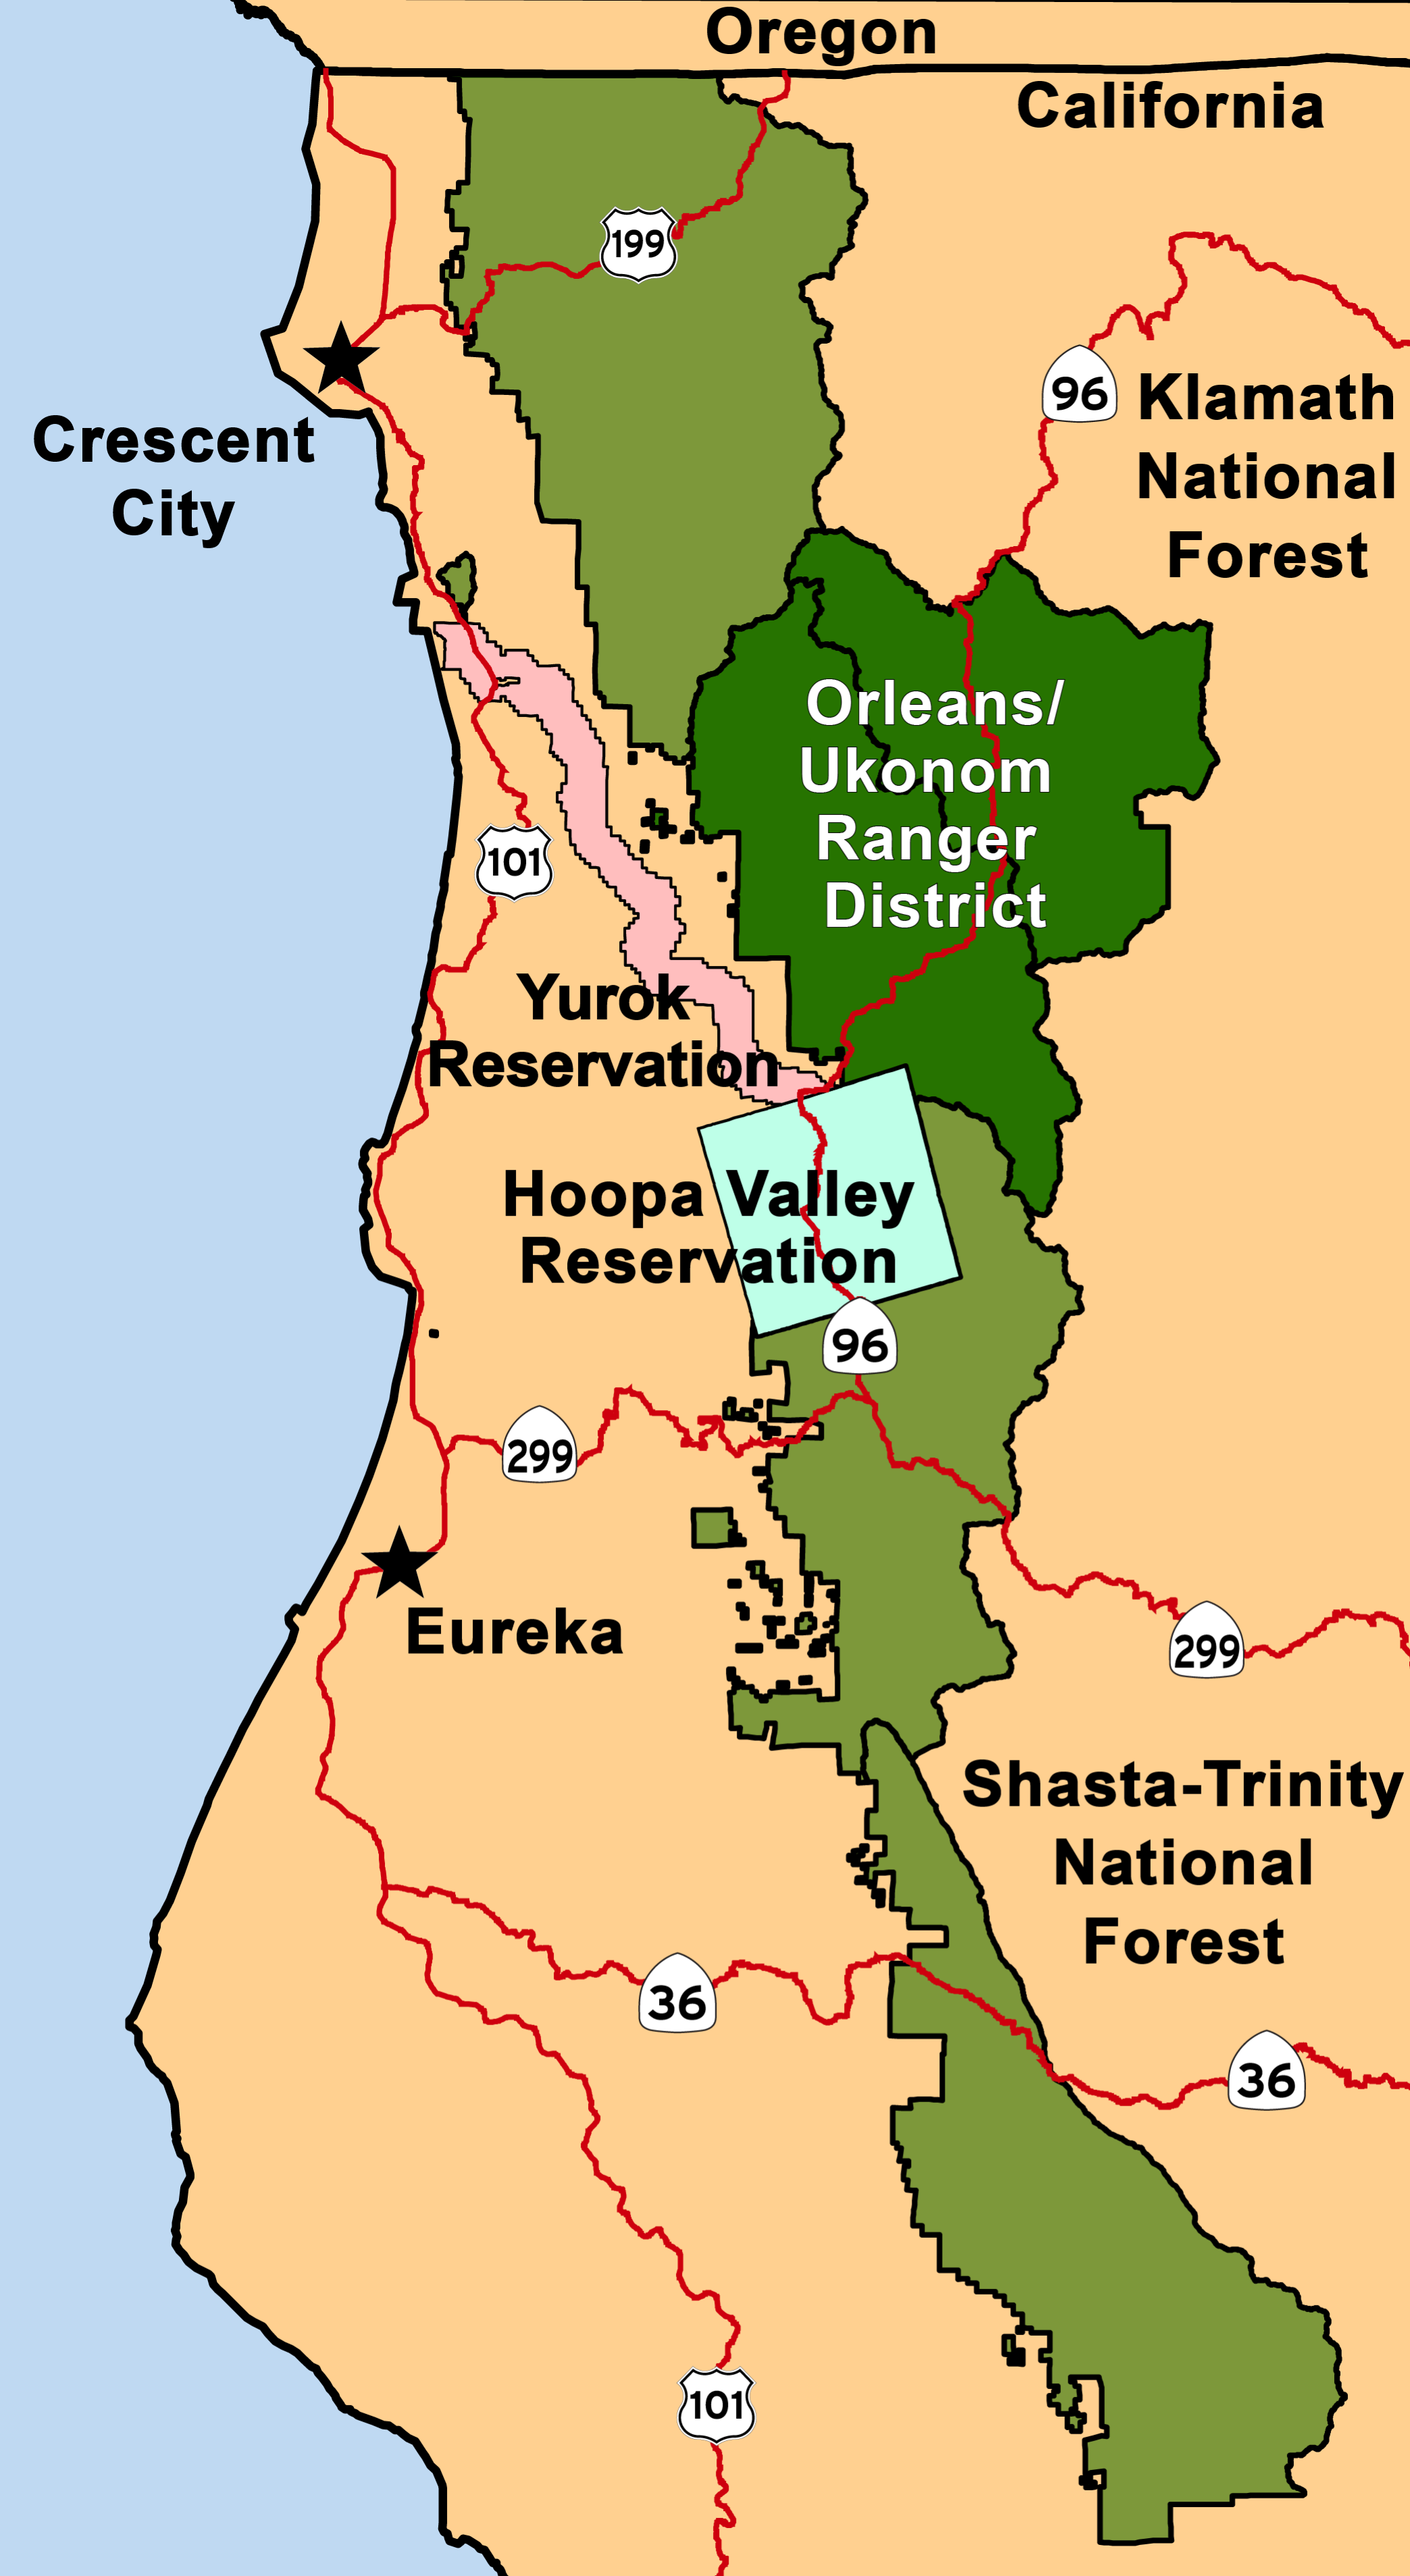 A map of the Six Rivers National Forest highlighting the Orleans/Ukonom Ranger District